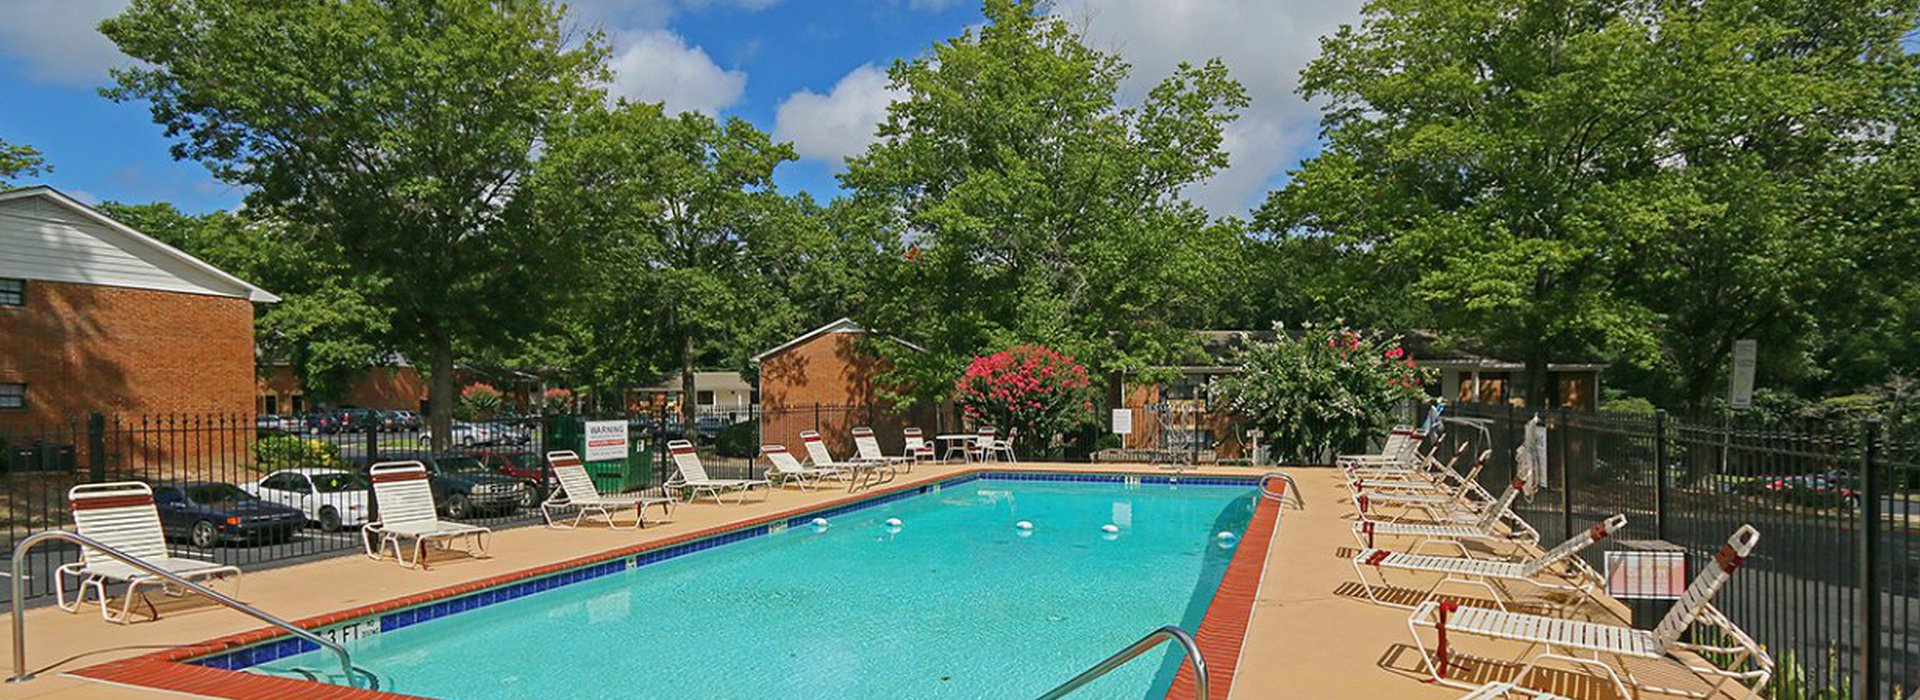 Property with outdoor pool to enjoy with the family.